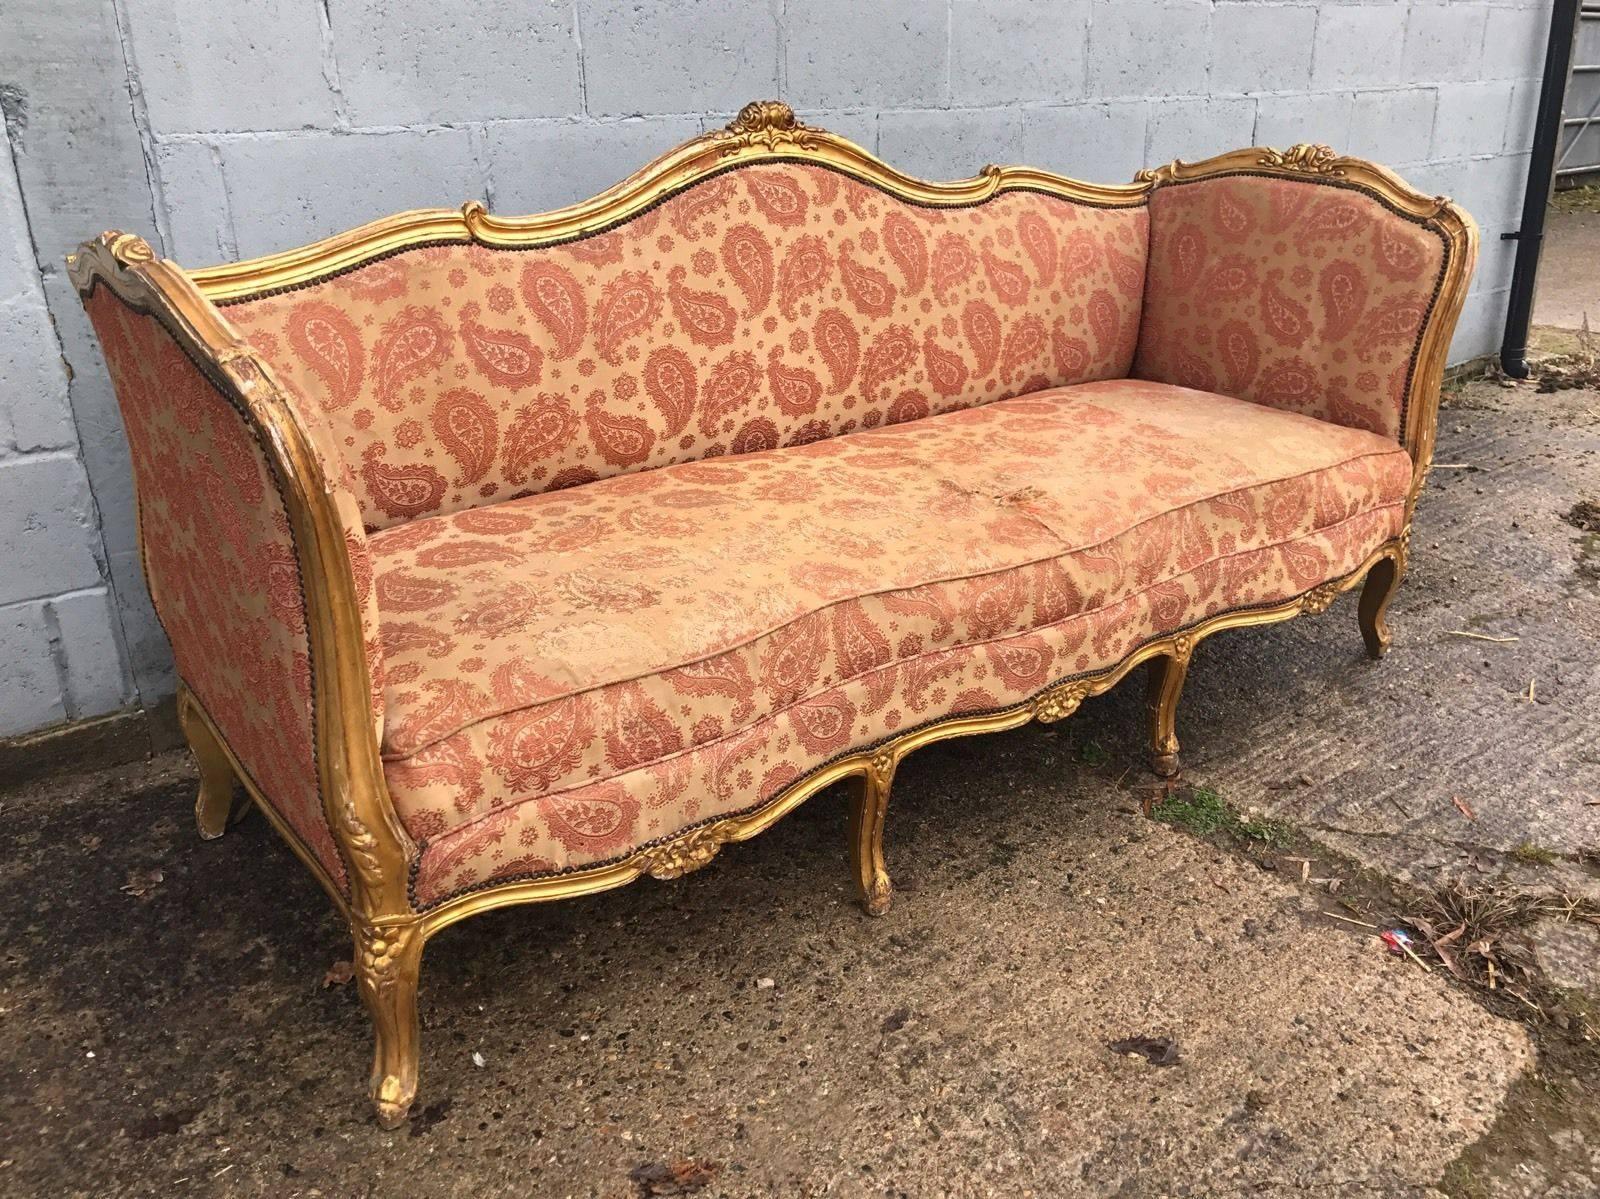 Here we have a beautiful French Rococo sofa. The giltwood work is in fantastic condition, along with the beautiful fabric. 

Slight 2